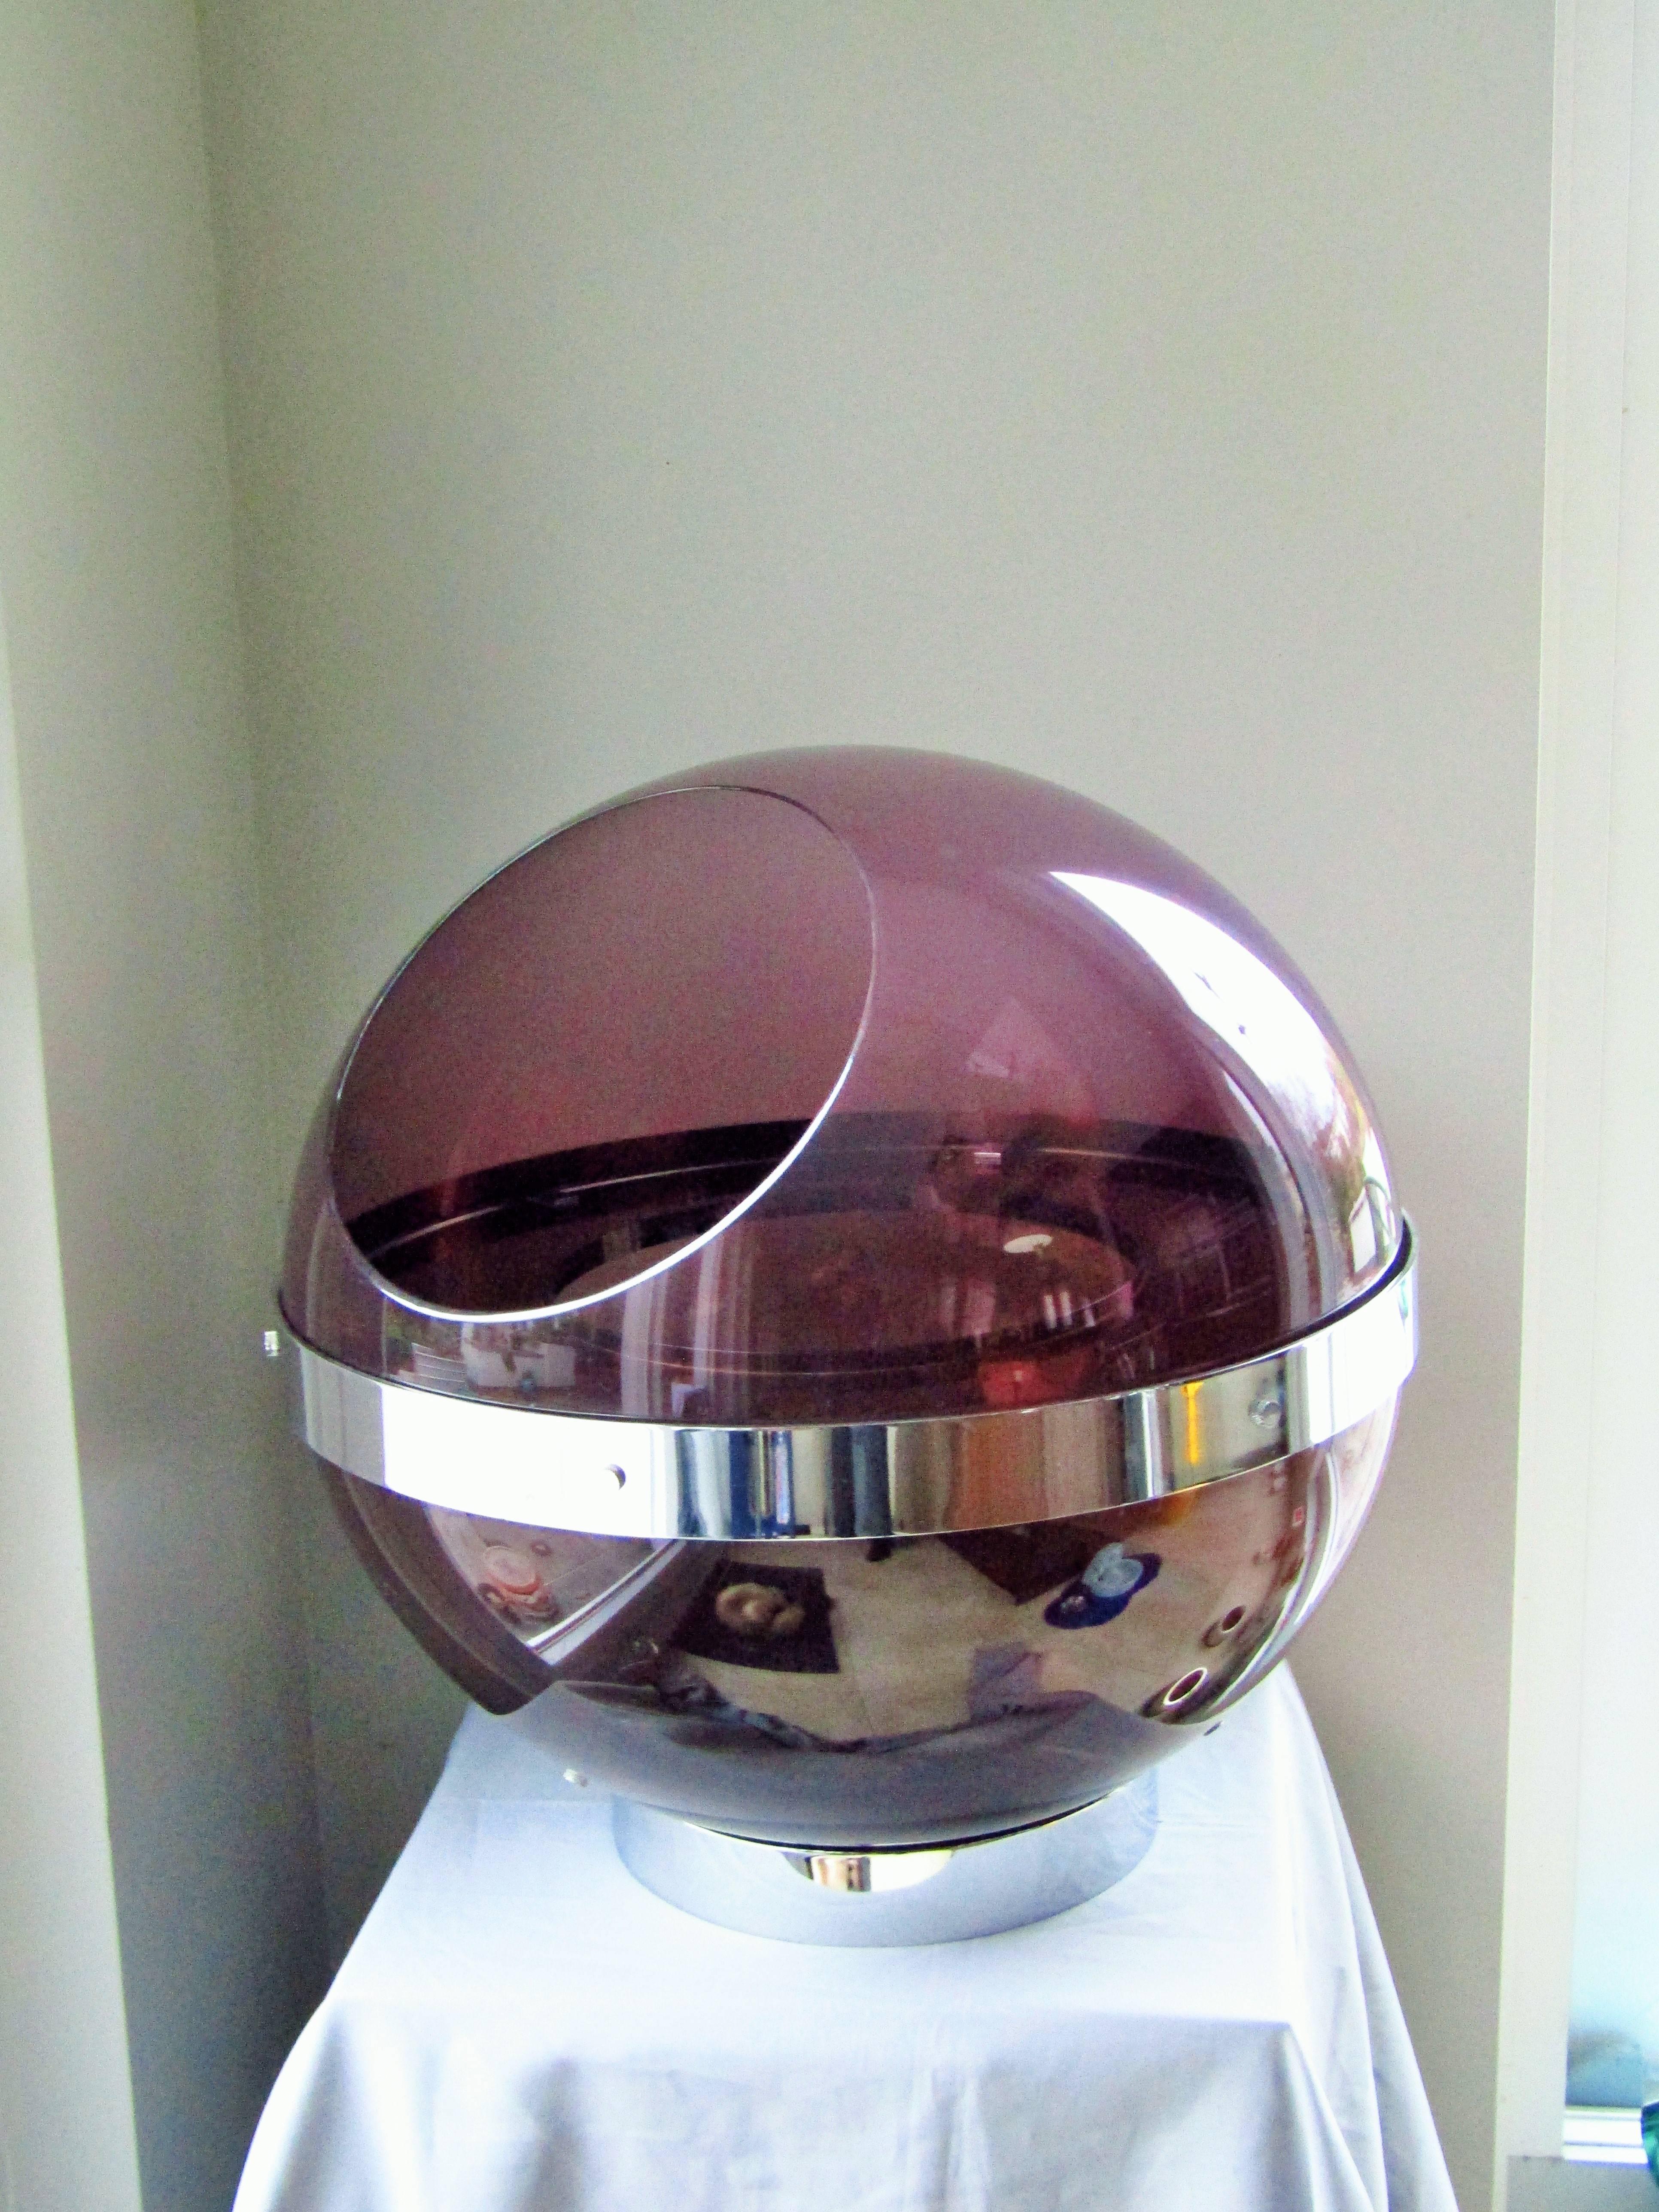 Boris Tabacoff 'Sphere' bar Edition 'Mobilier Modulaire Moderne', 1971. Smoked amethyst colored acrylic glass shell. Chromed flat steel base. Good vintage condition.

 